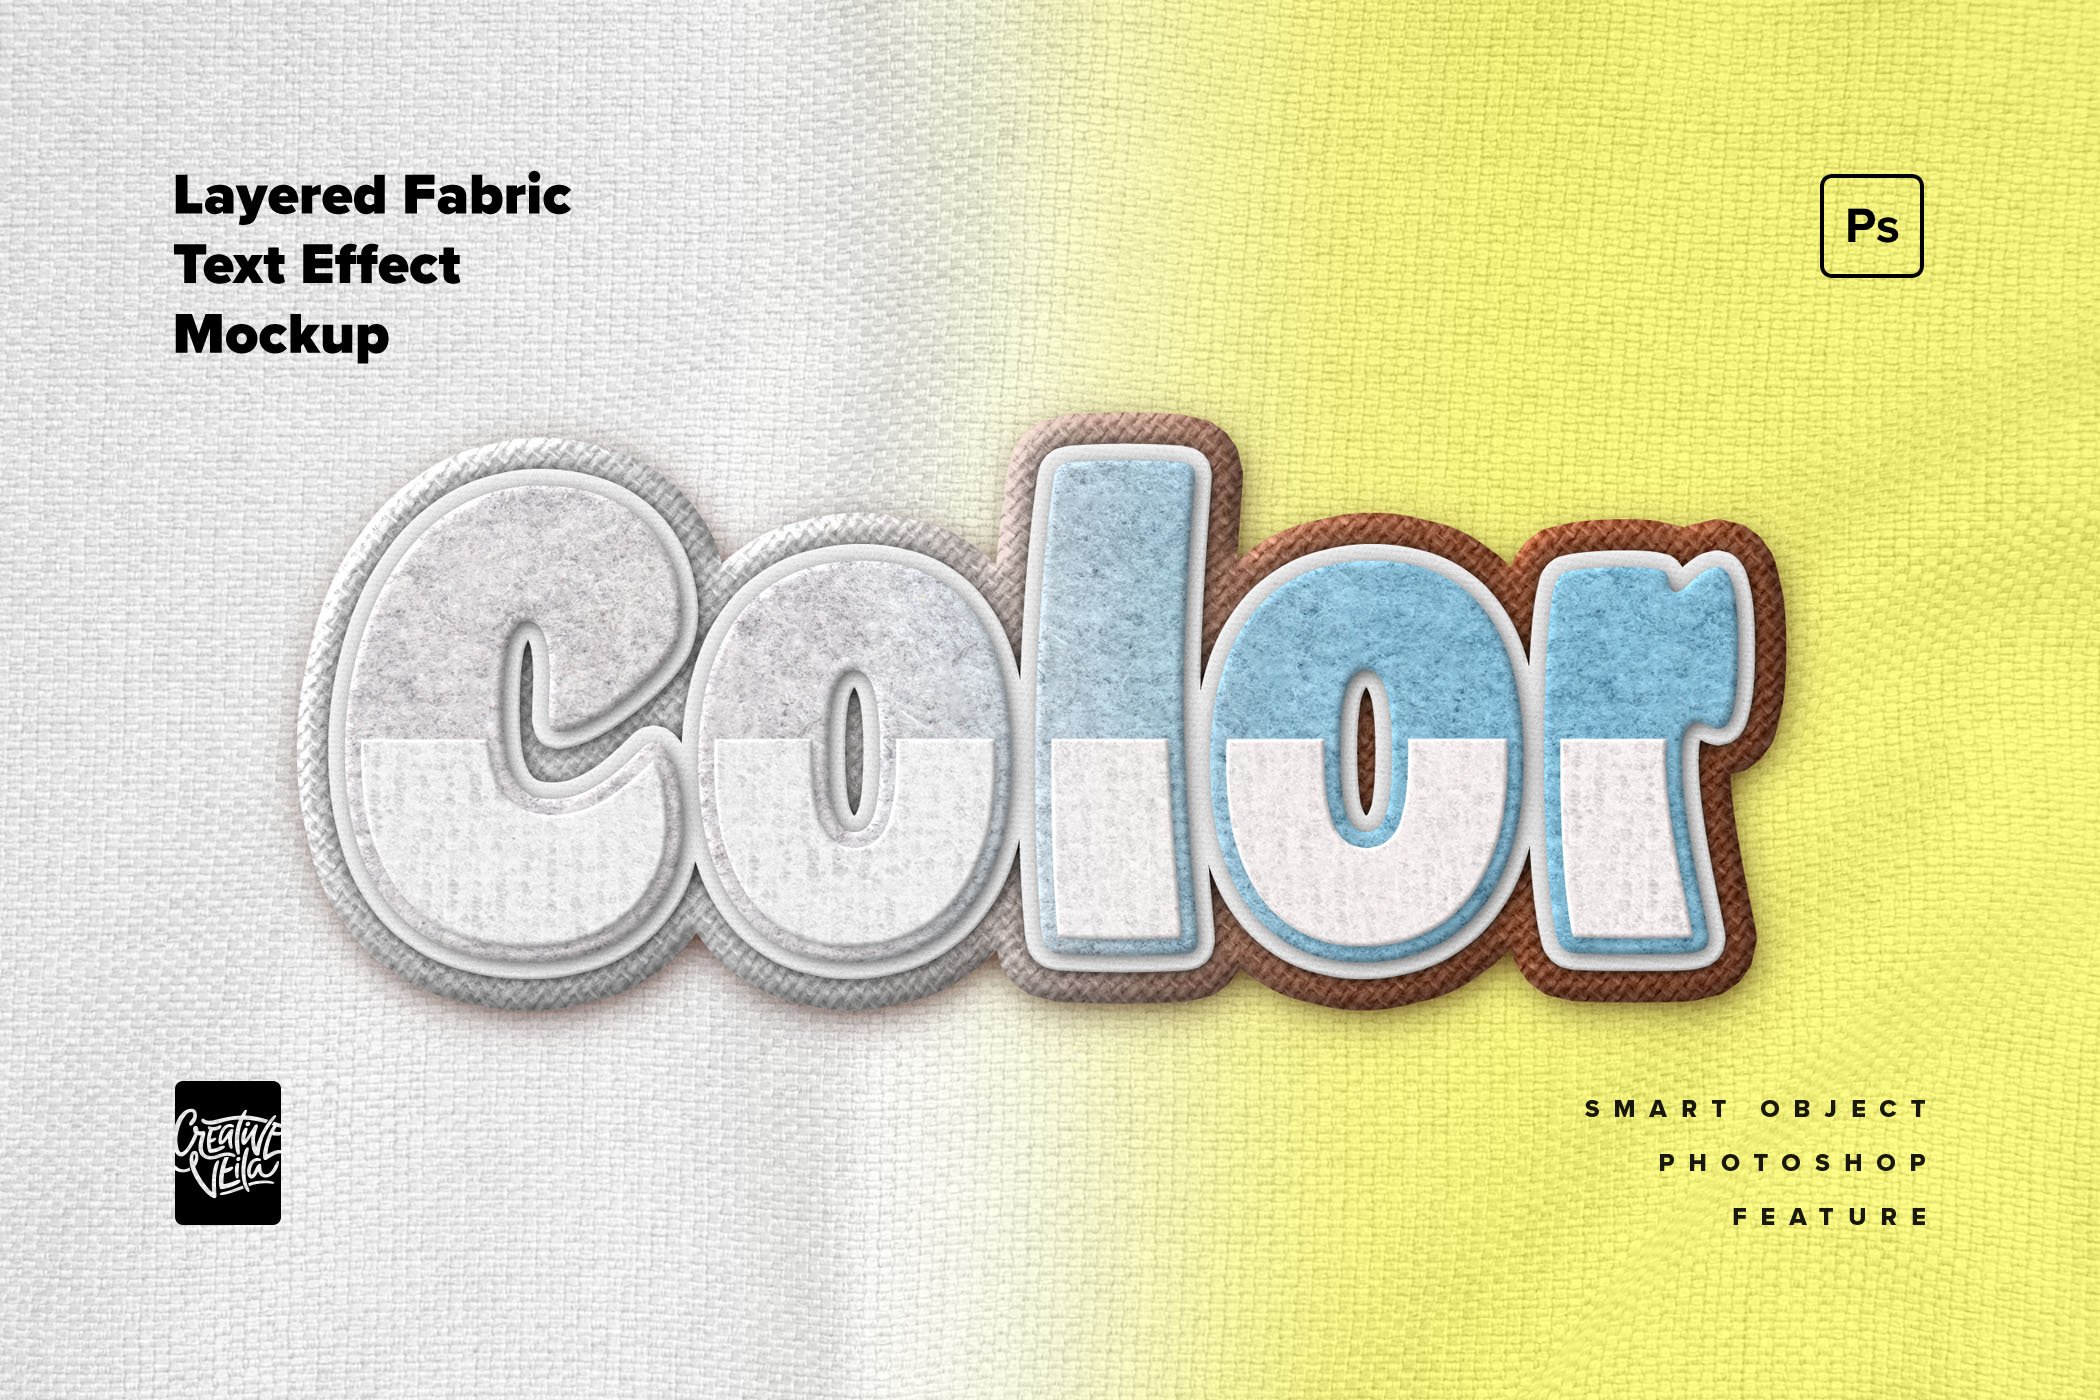 Layered Fabric Text Effect Mockuppreview image.